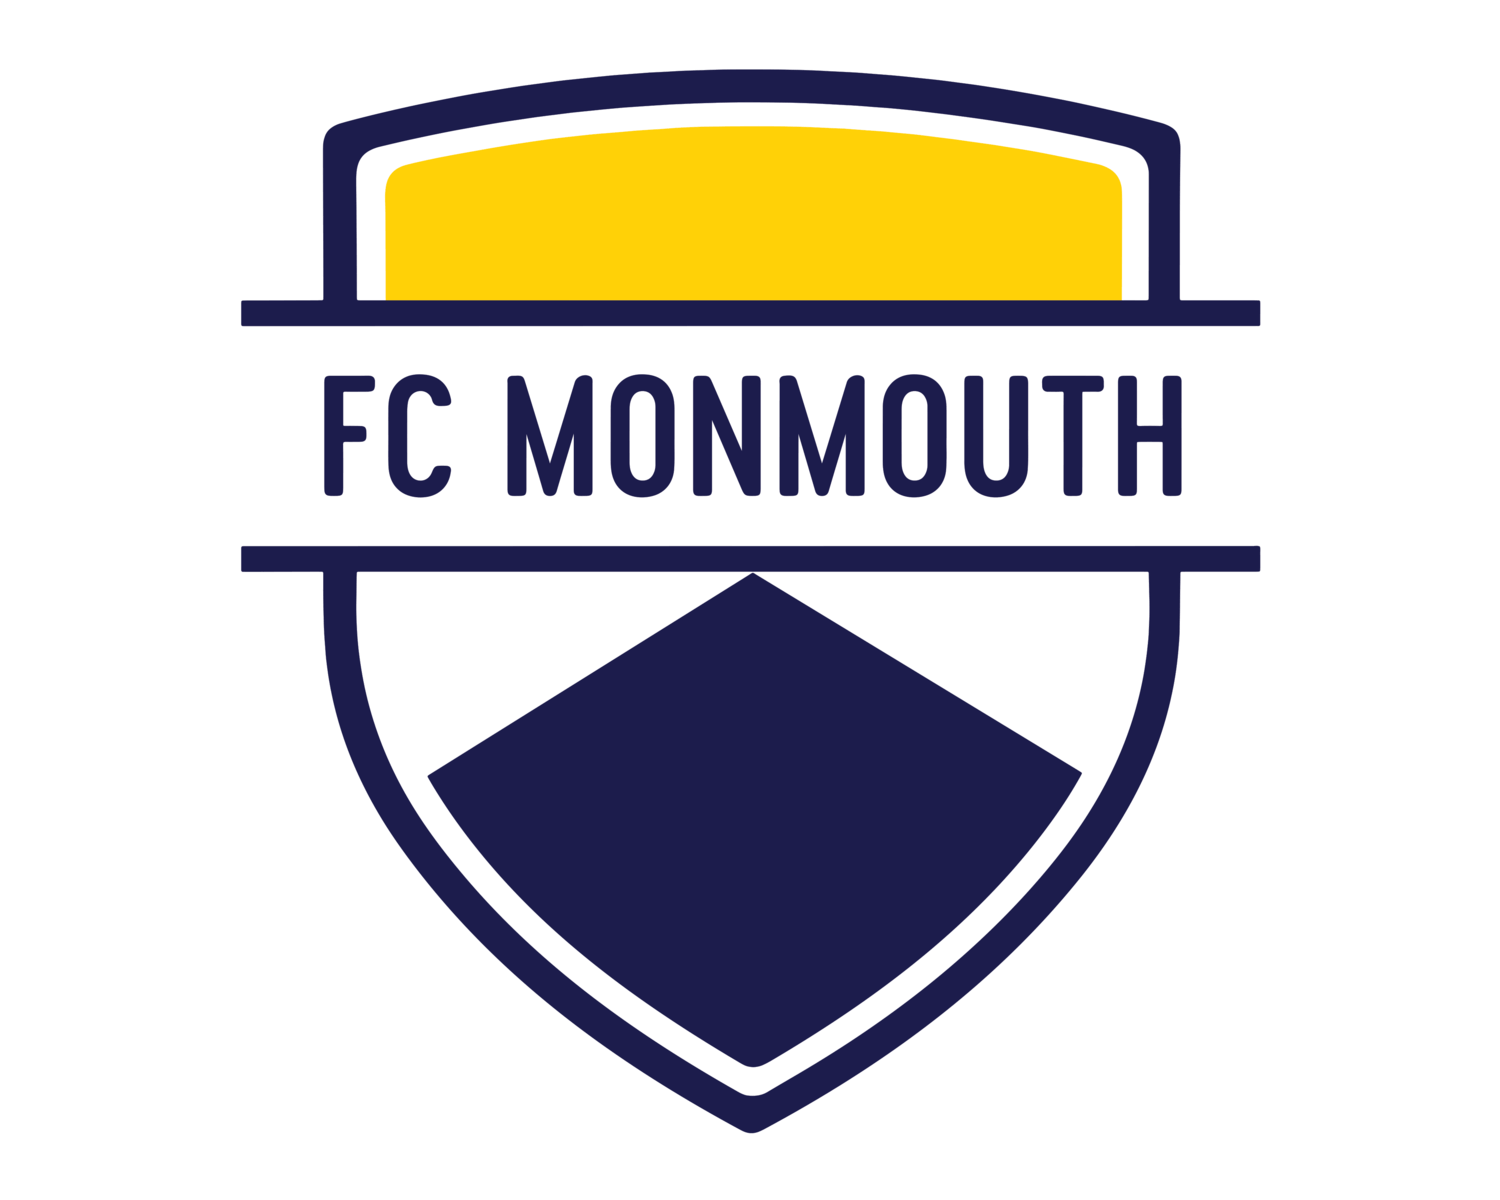 Monmouth Logo - FC Monmouth Are Monmouth